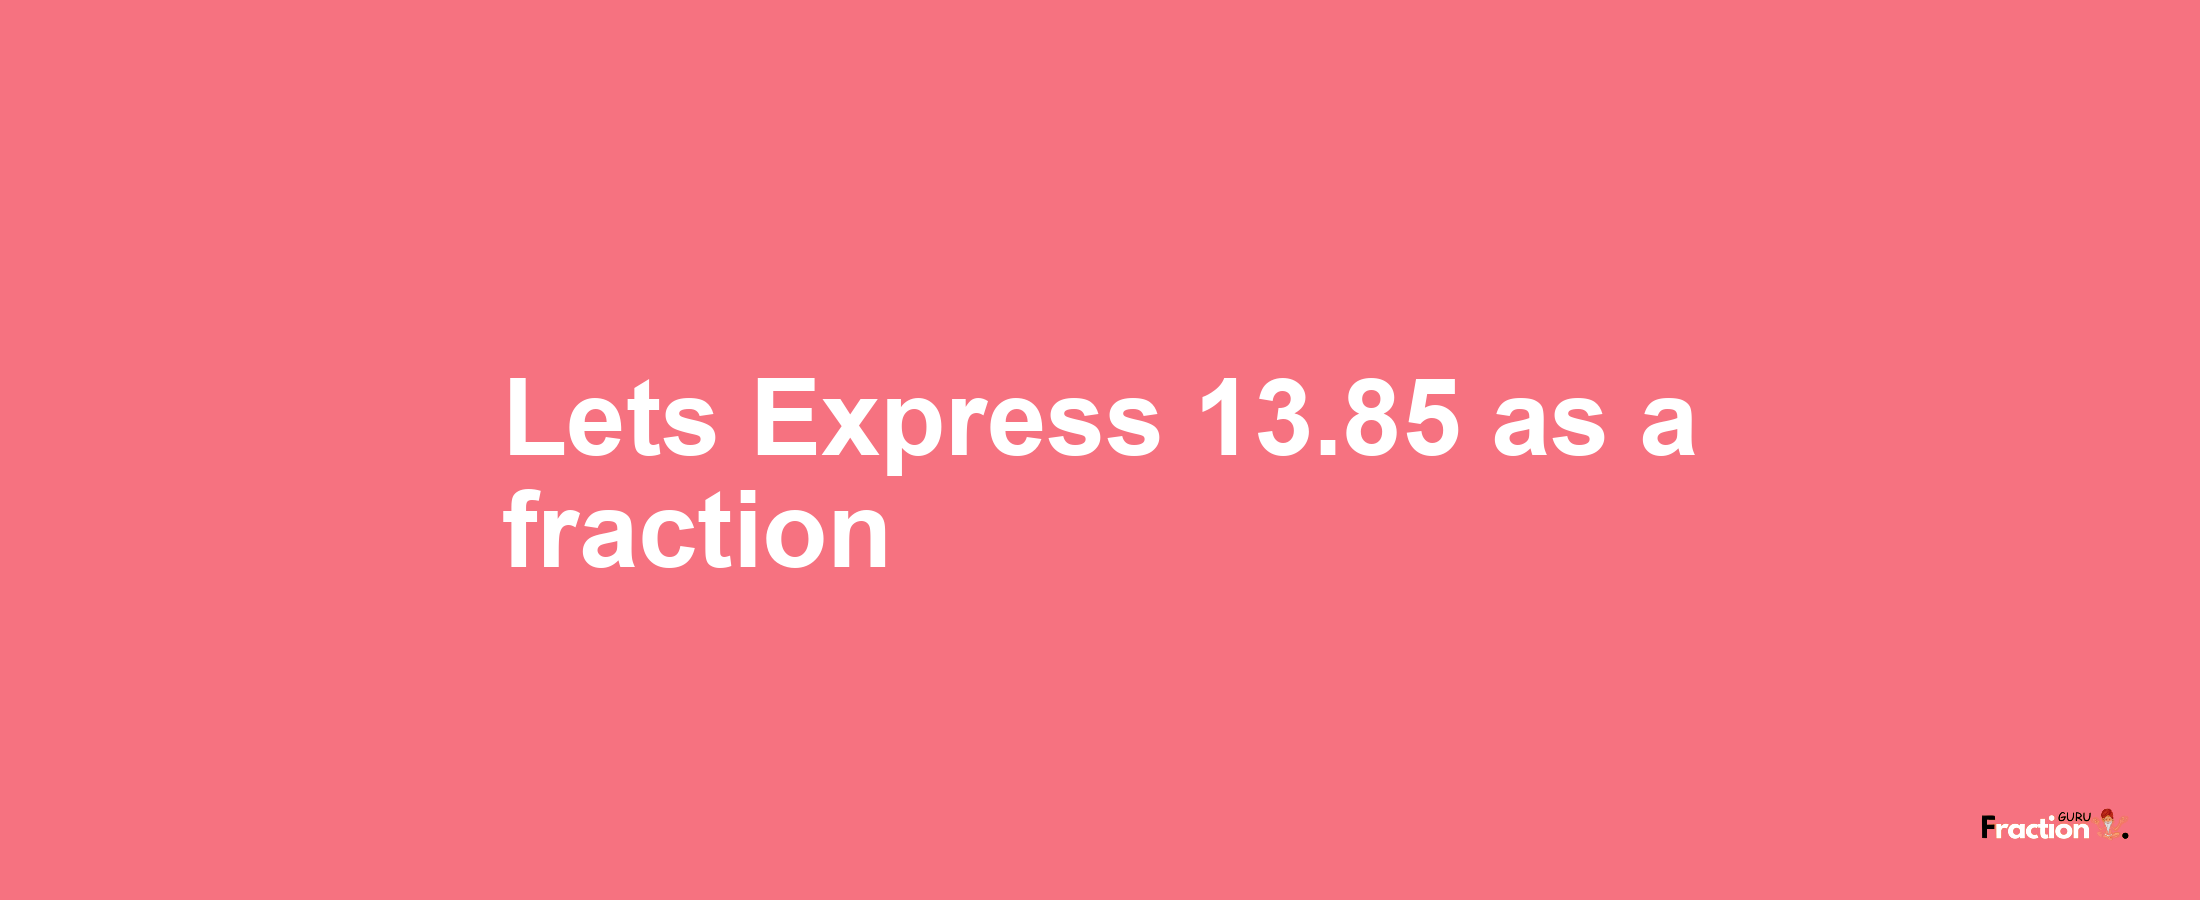 Lets Express 13.85 as afraction